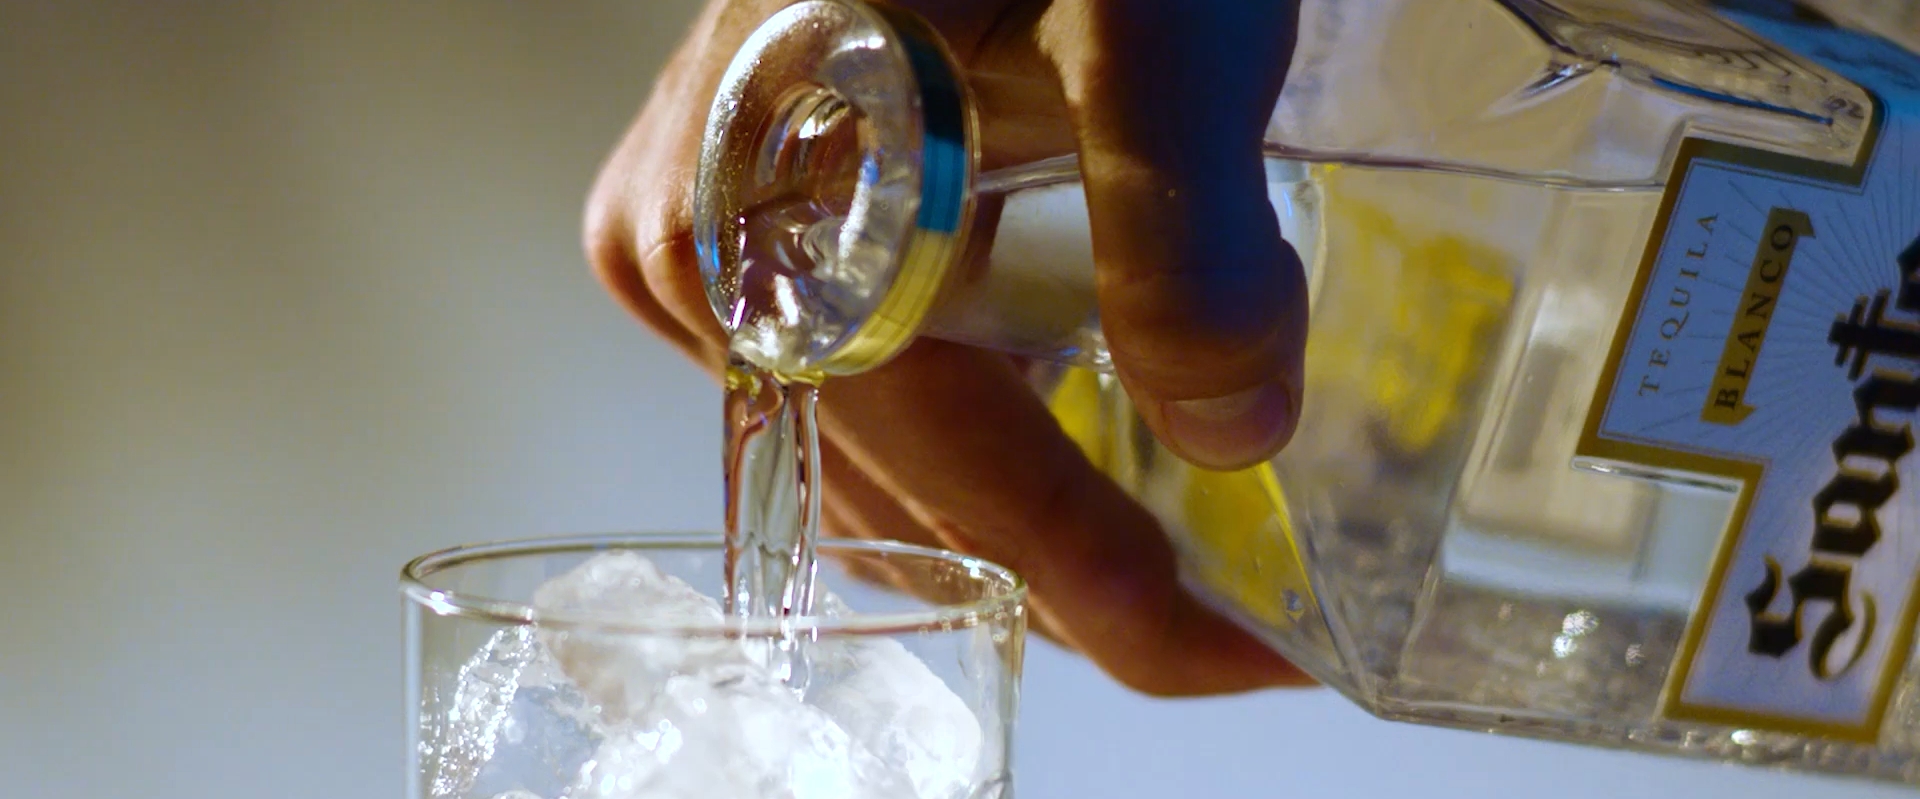 Hand holding a bottle of Santo Blanco tequila and pouring some into a glass of ice.